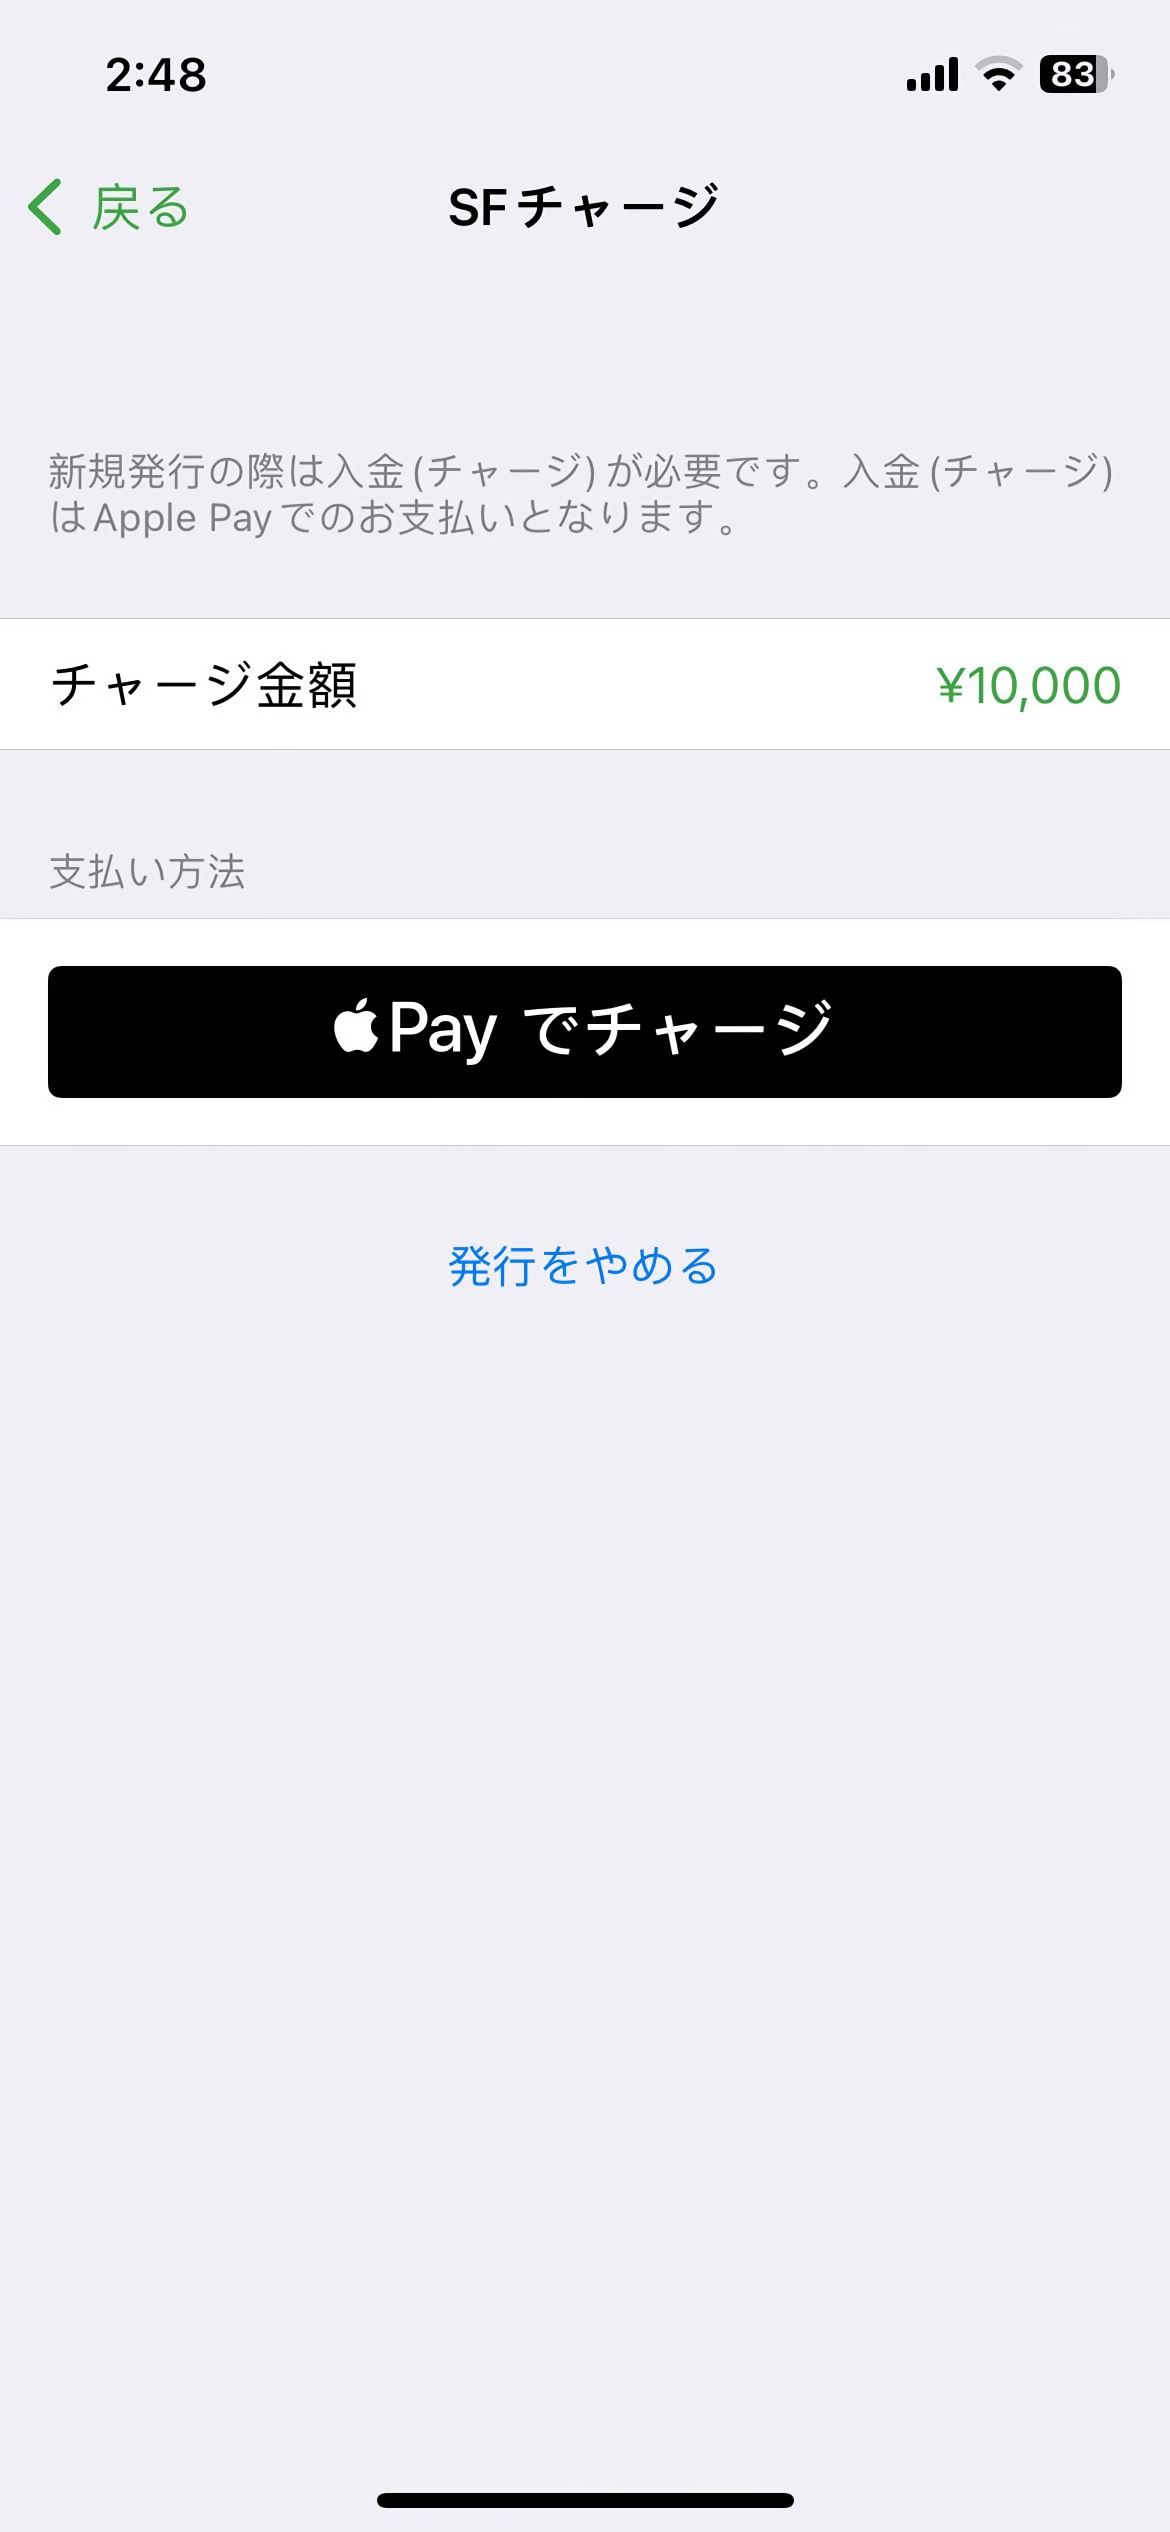 Screenshot of app with a white button labeled 10,000 yen and a black Apple Pay button